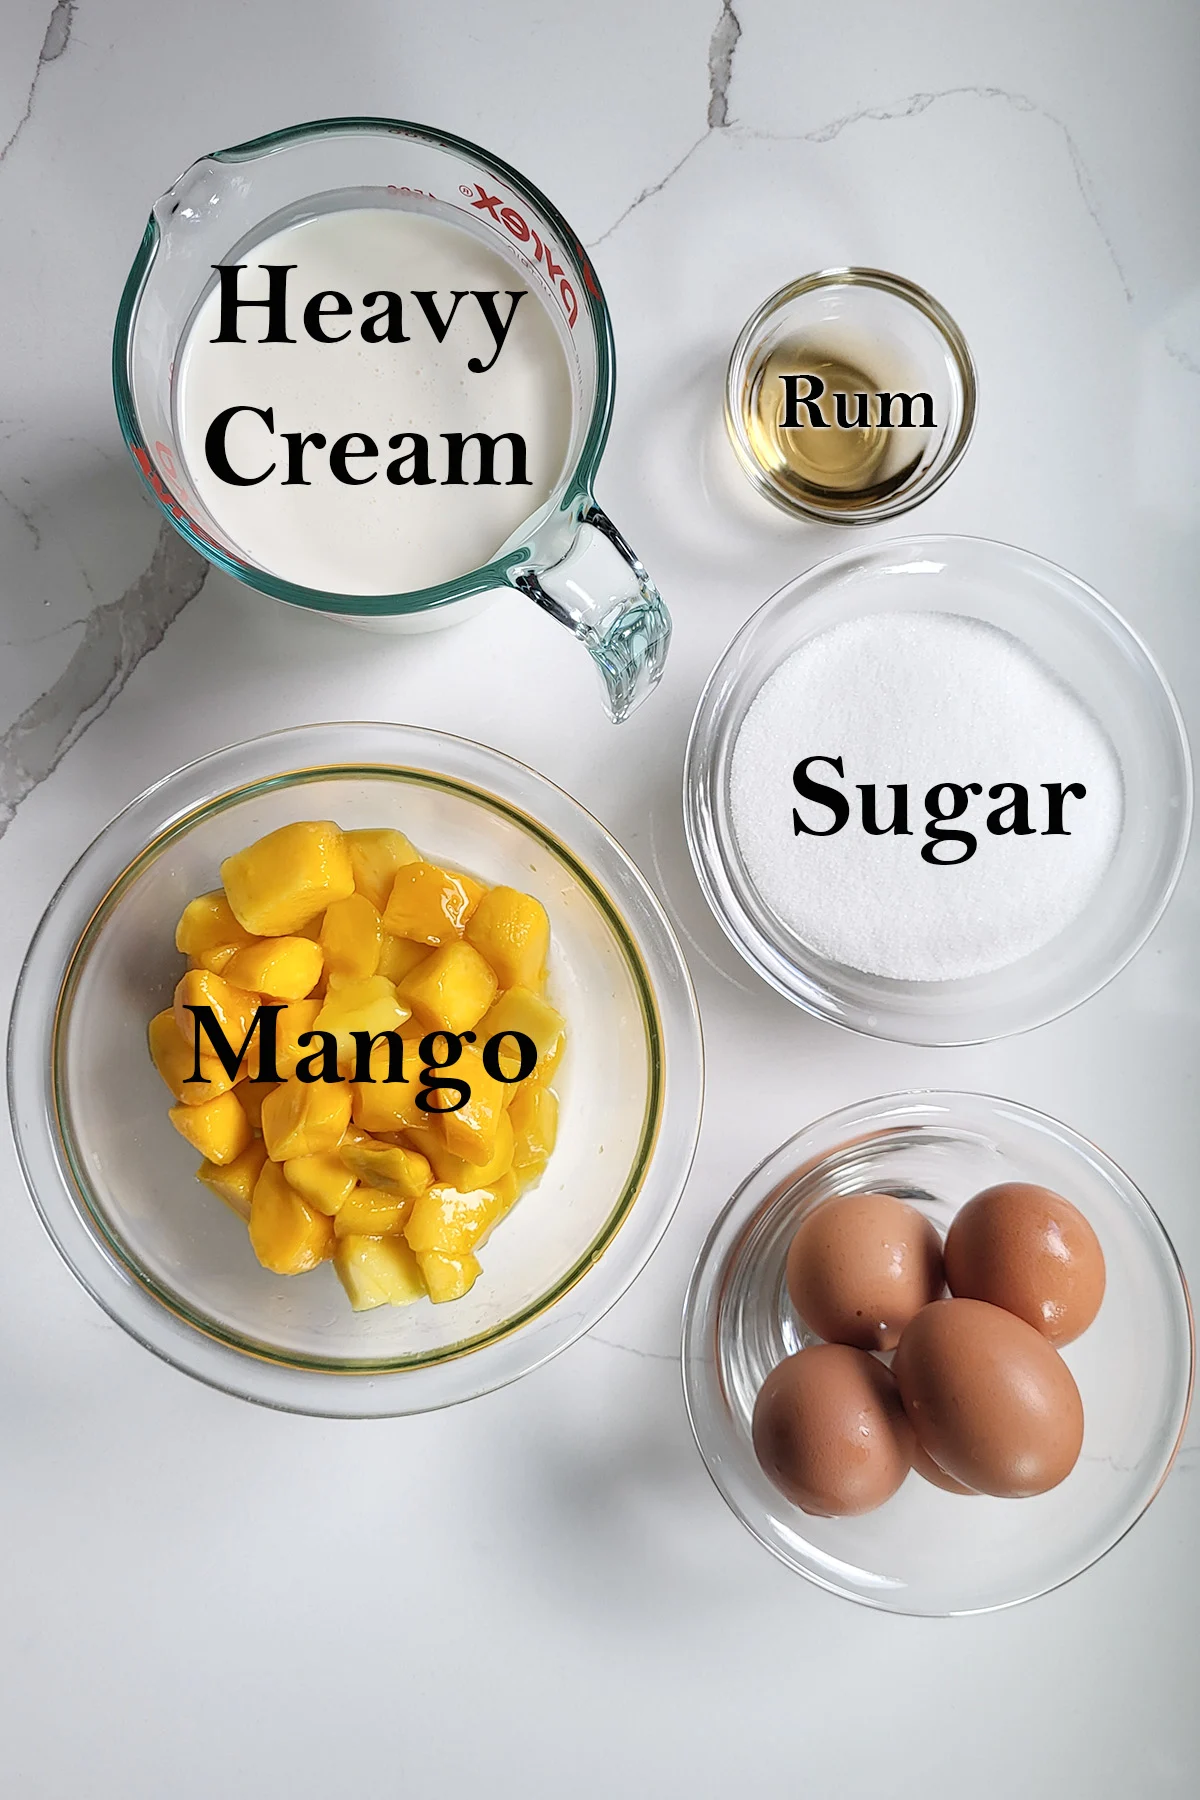 ingredients for mango ice cream in glass bowls on a white surface.